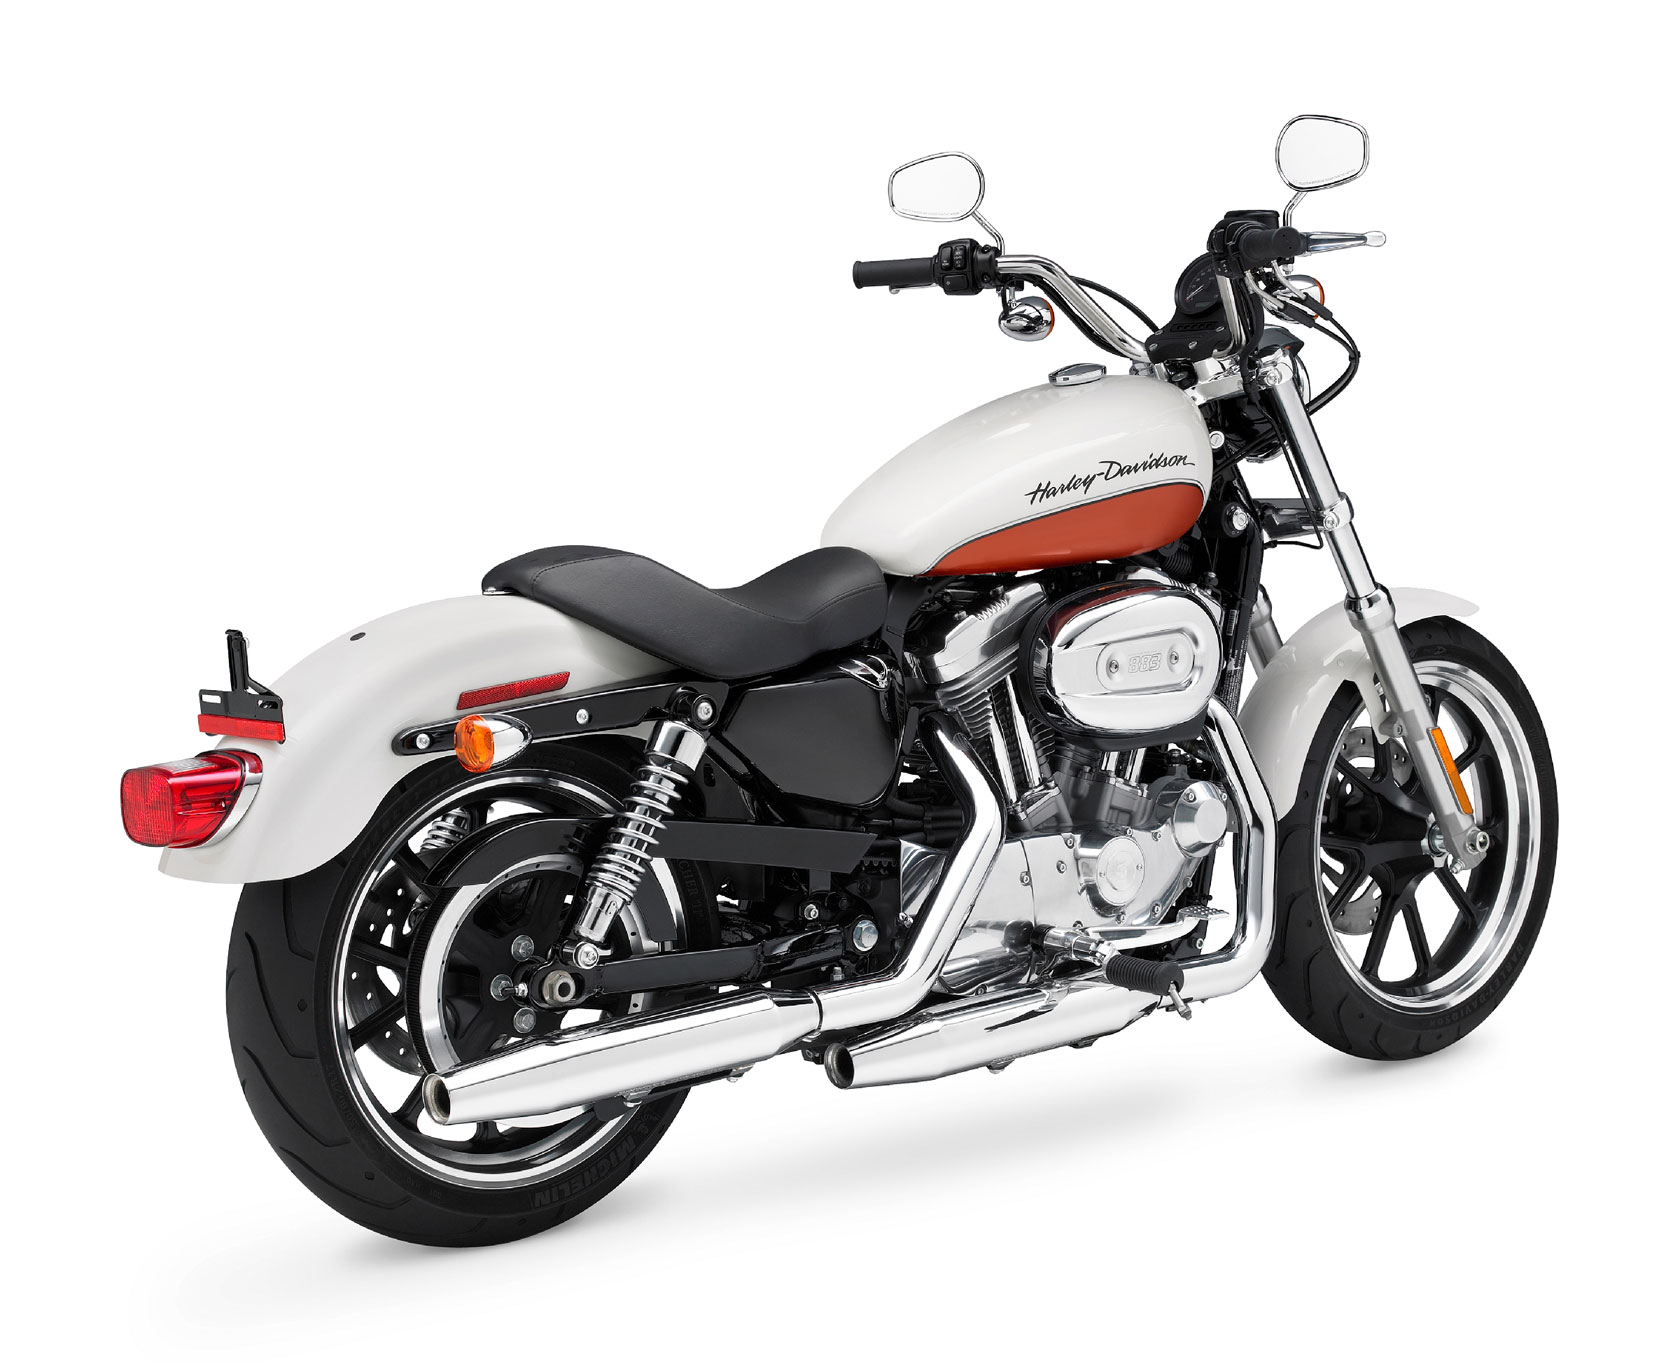 Crazy About Bikes Check Out Here 2011 Harley Davidson Xl 883l Sportster 883 Superlow